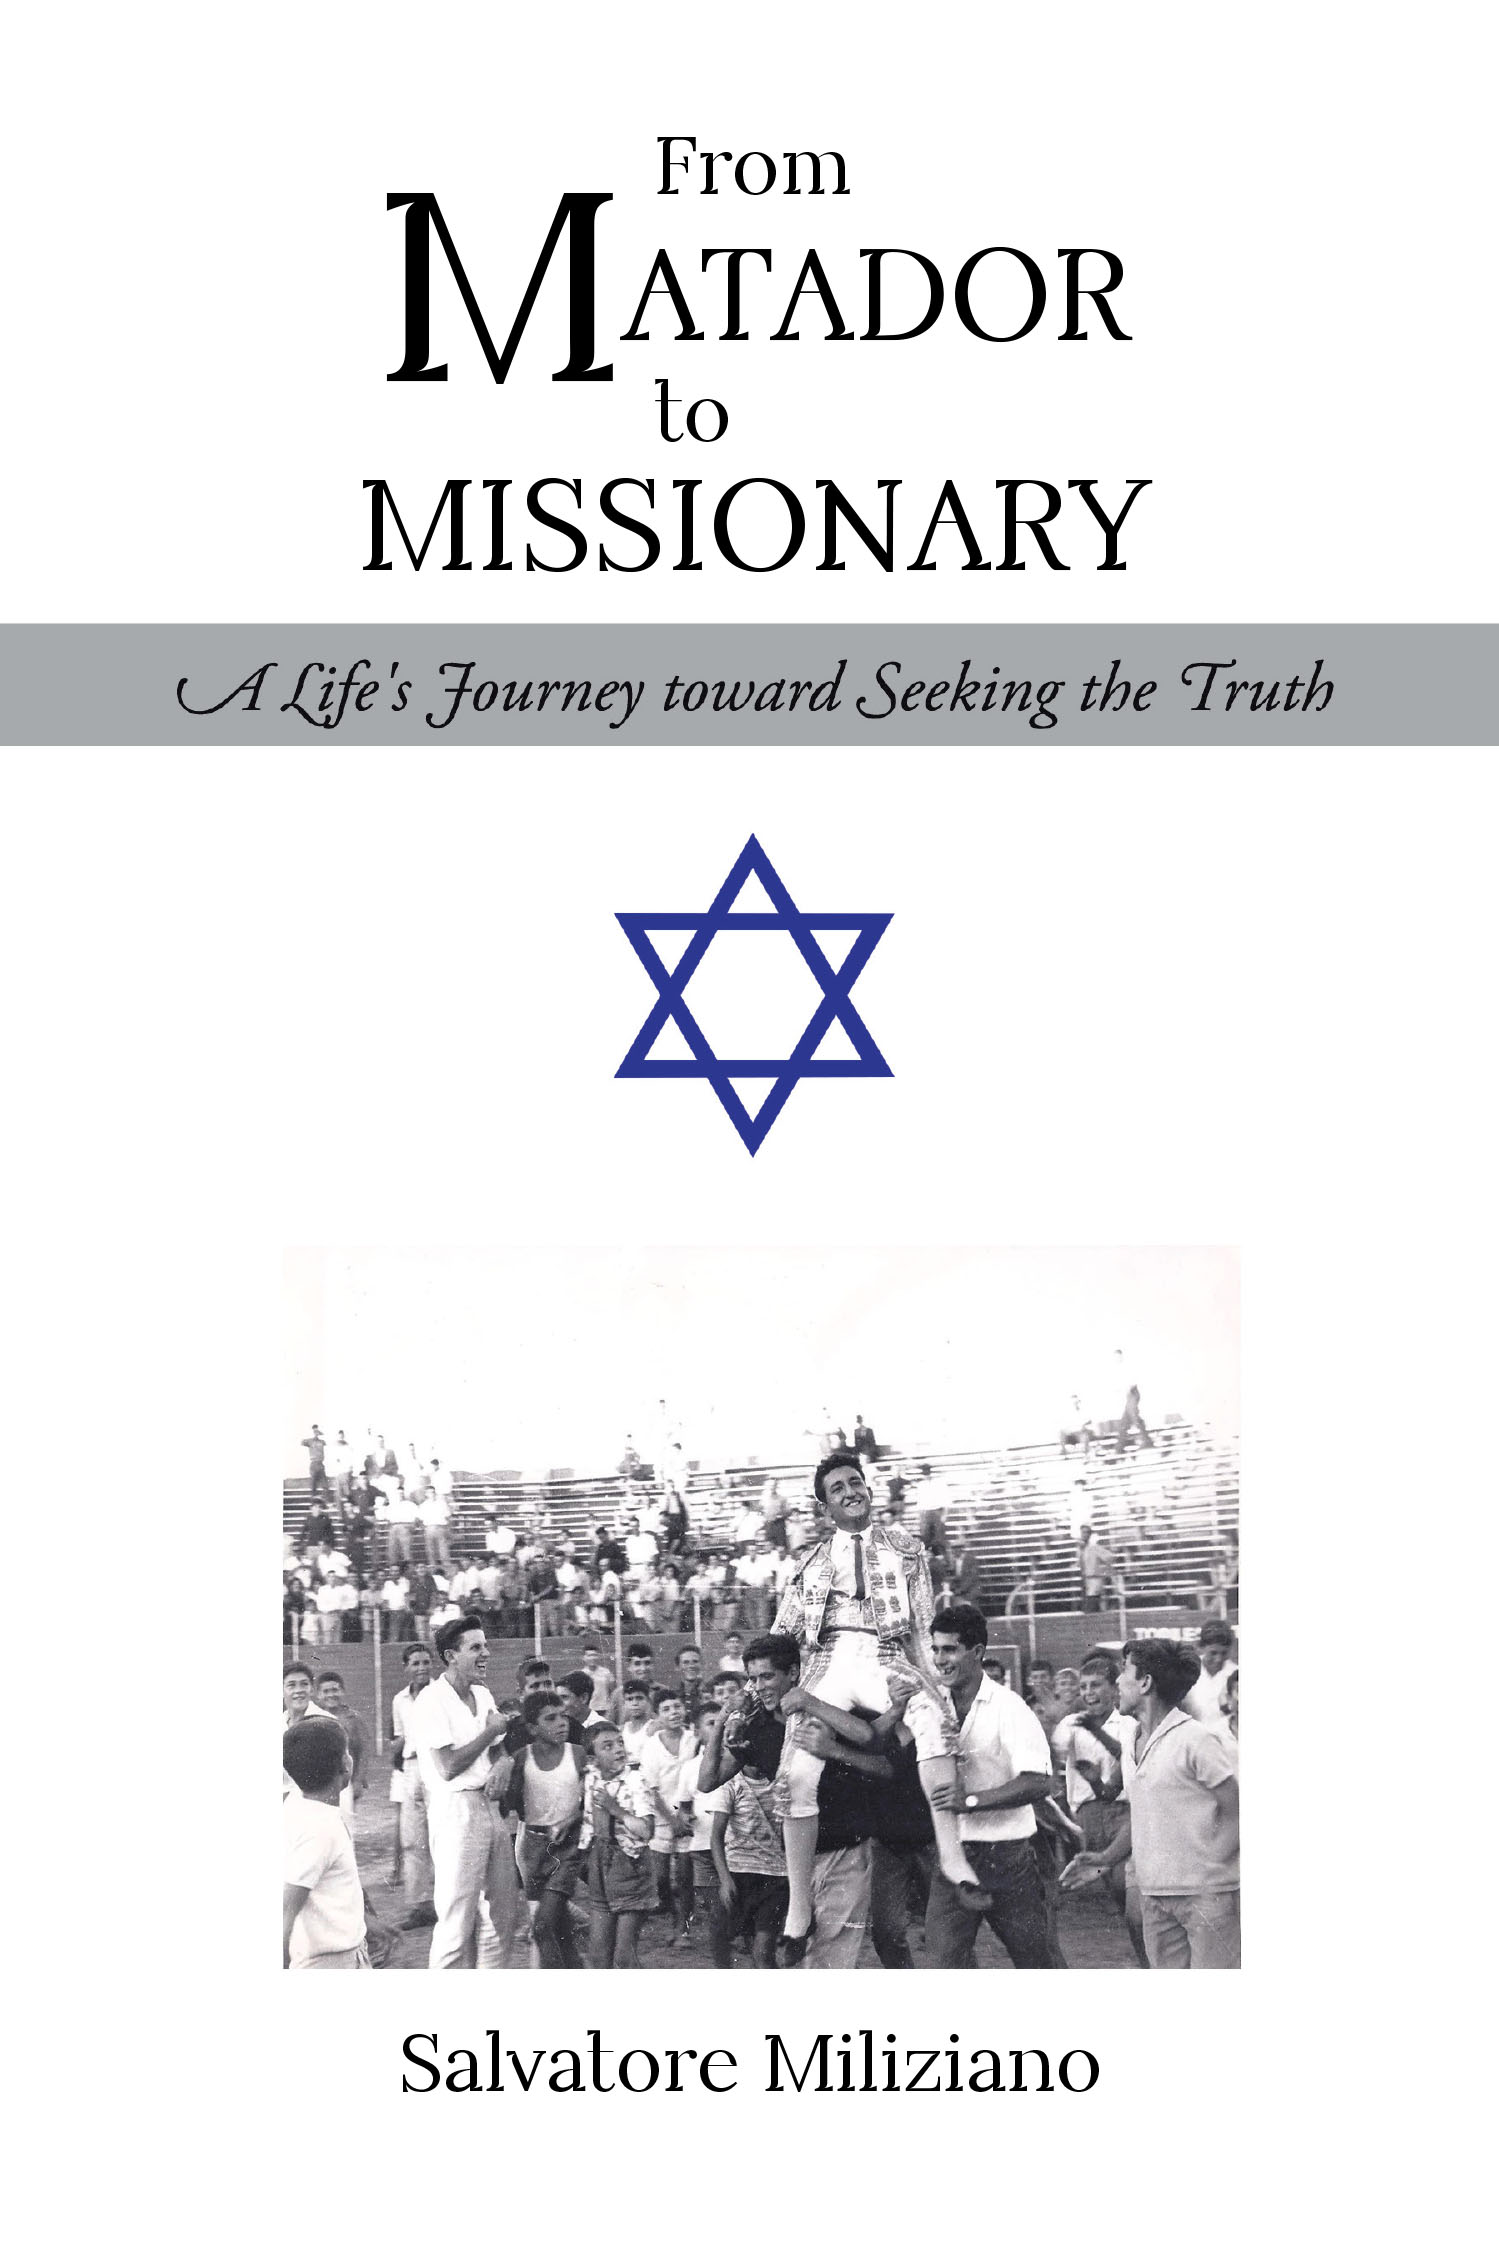 Author Salvatore Miliziano’s New Book, “From Matador to Missionary: A Life's Journey toward Seeking the Truth,” Documents the Author’s Lifelong Journey in Christ